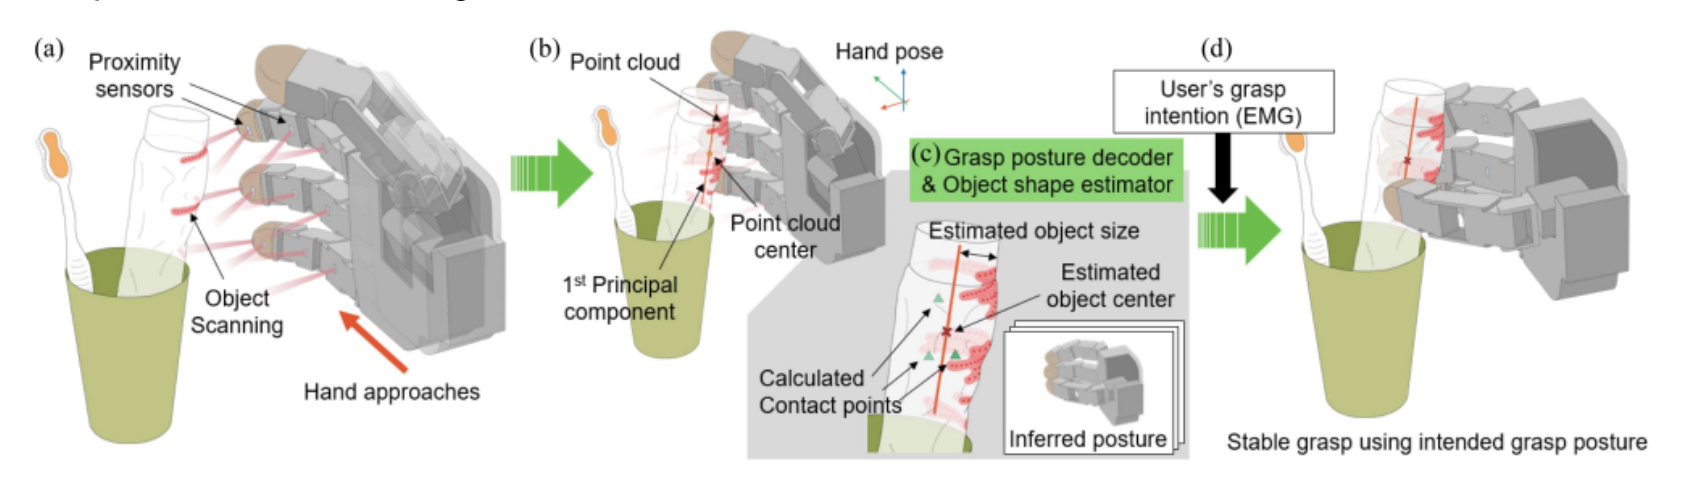 Scheme 1. Methodology of the P2GI system. (a) Proximity sensors on the palmar side of the prosthetic hand scan the surface of an object as the hand approaches the object. (b) Scanned points form a point cloud of the target object. (c) The grasp posture decoder infers the intended grasp posture of the user; and the object shape estimator estimates the size and exact center position of the object. Based on these decisions, the contact points for a stable grasp are calculated. (d) When the user gives the simple grasp command, the prosthetic hand stably grasps the object using the intended grasp posture of the user.